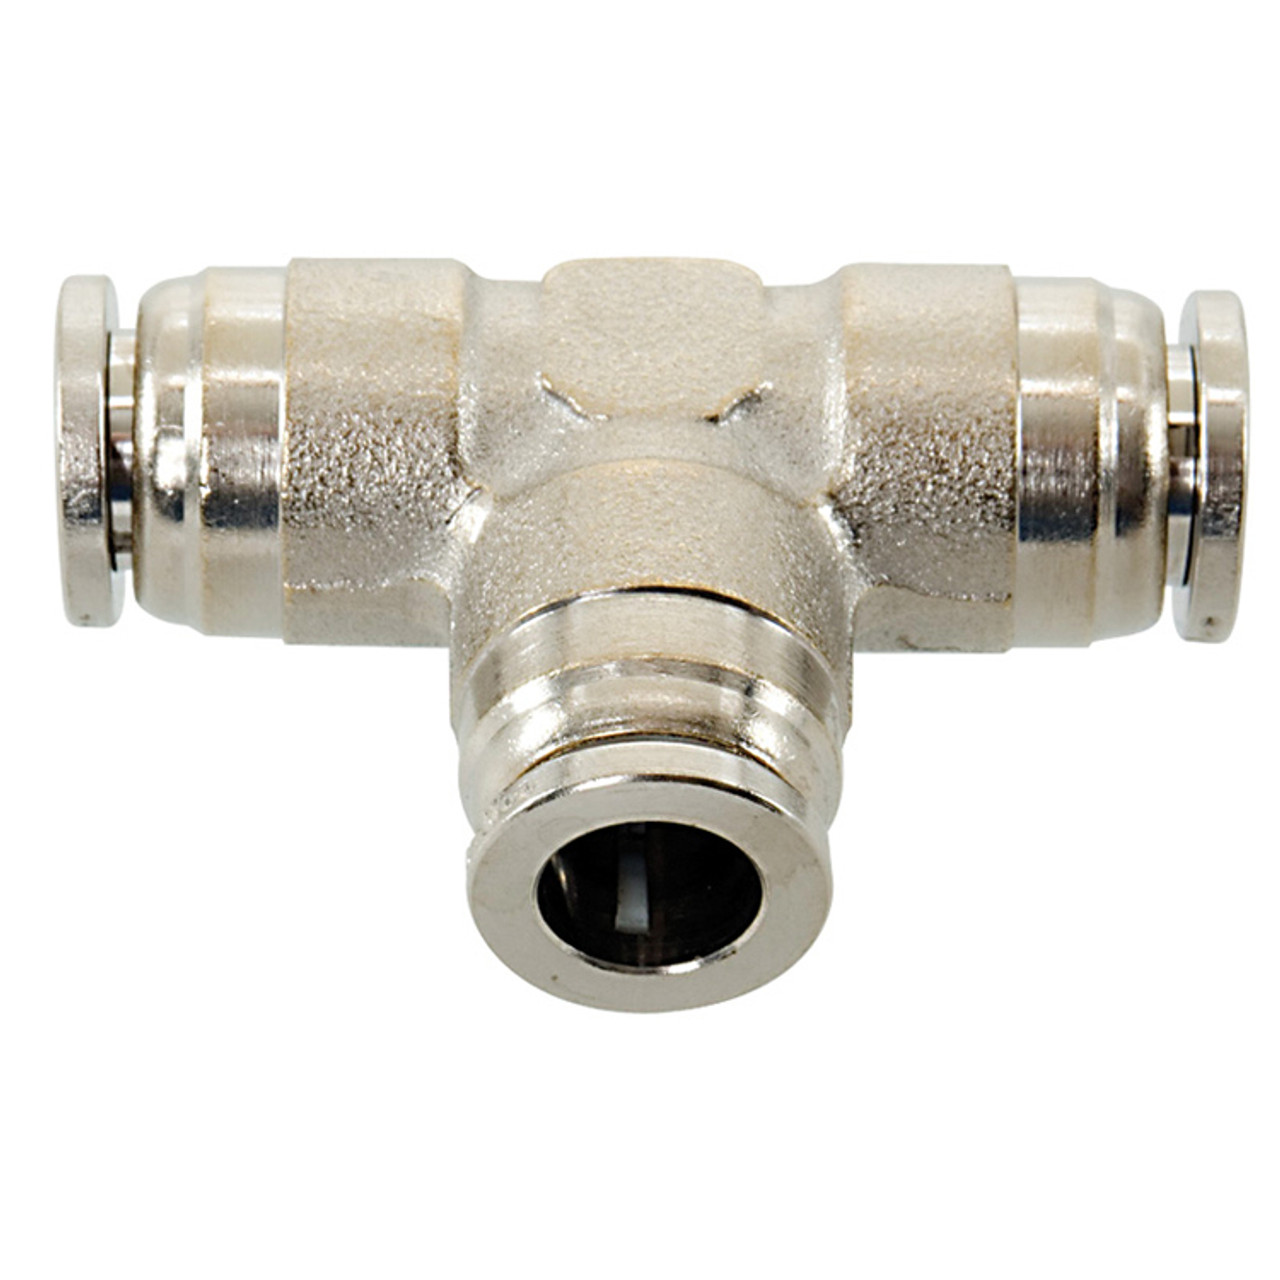 1/8" Nickel Plated Brass Push-To-Connect Tee   G60T00P-02-02